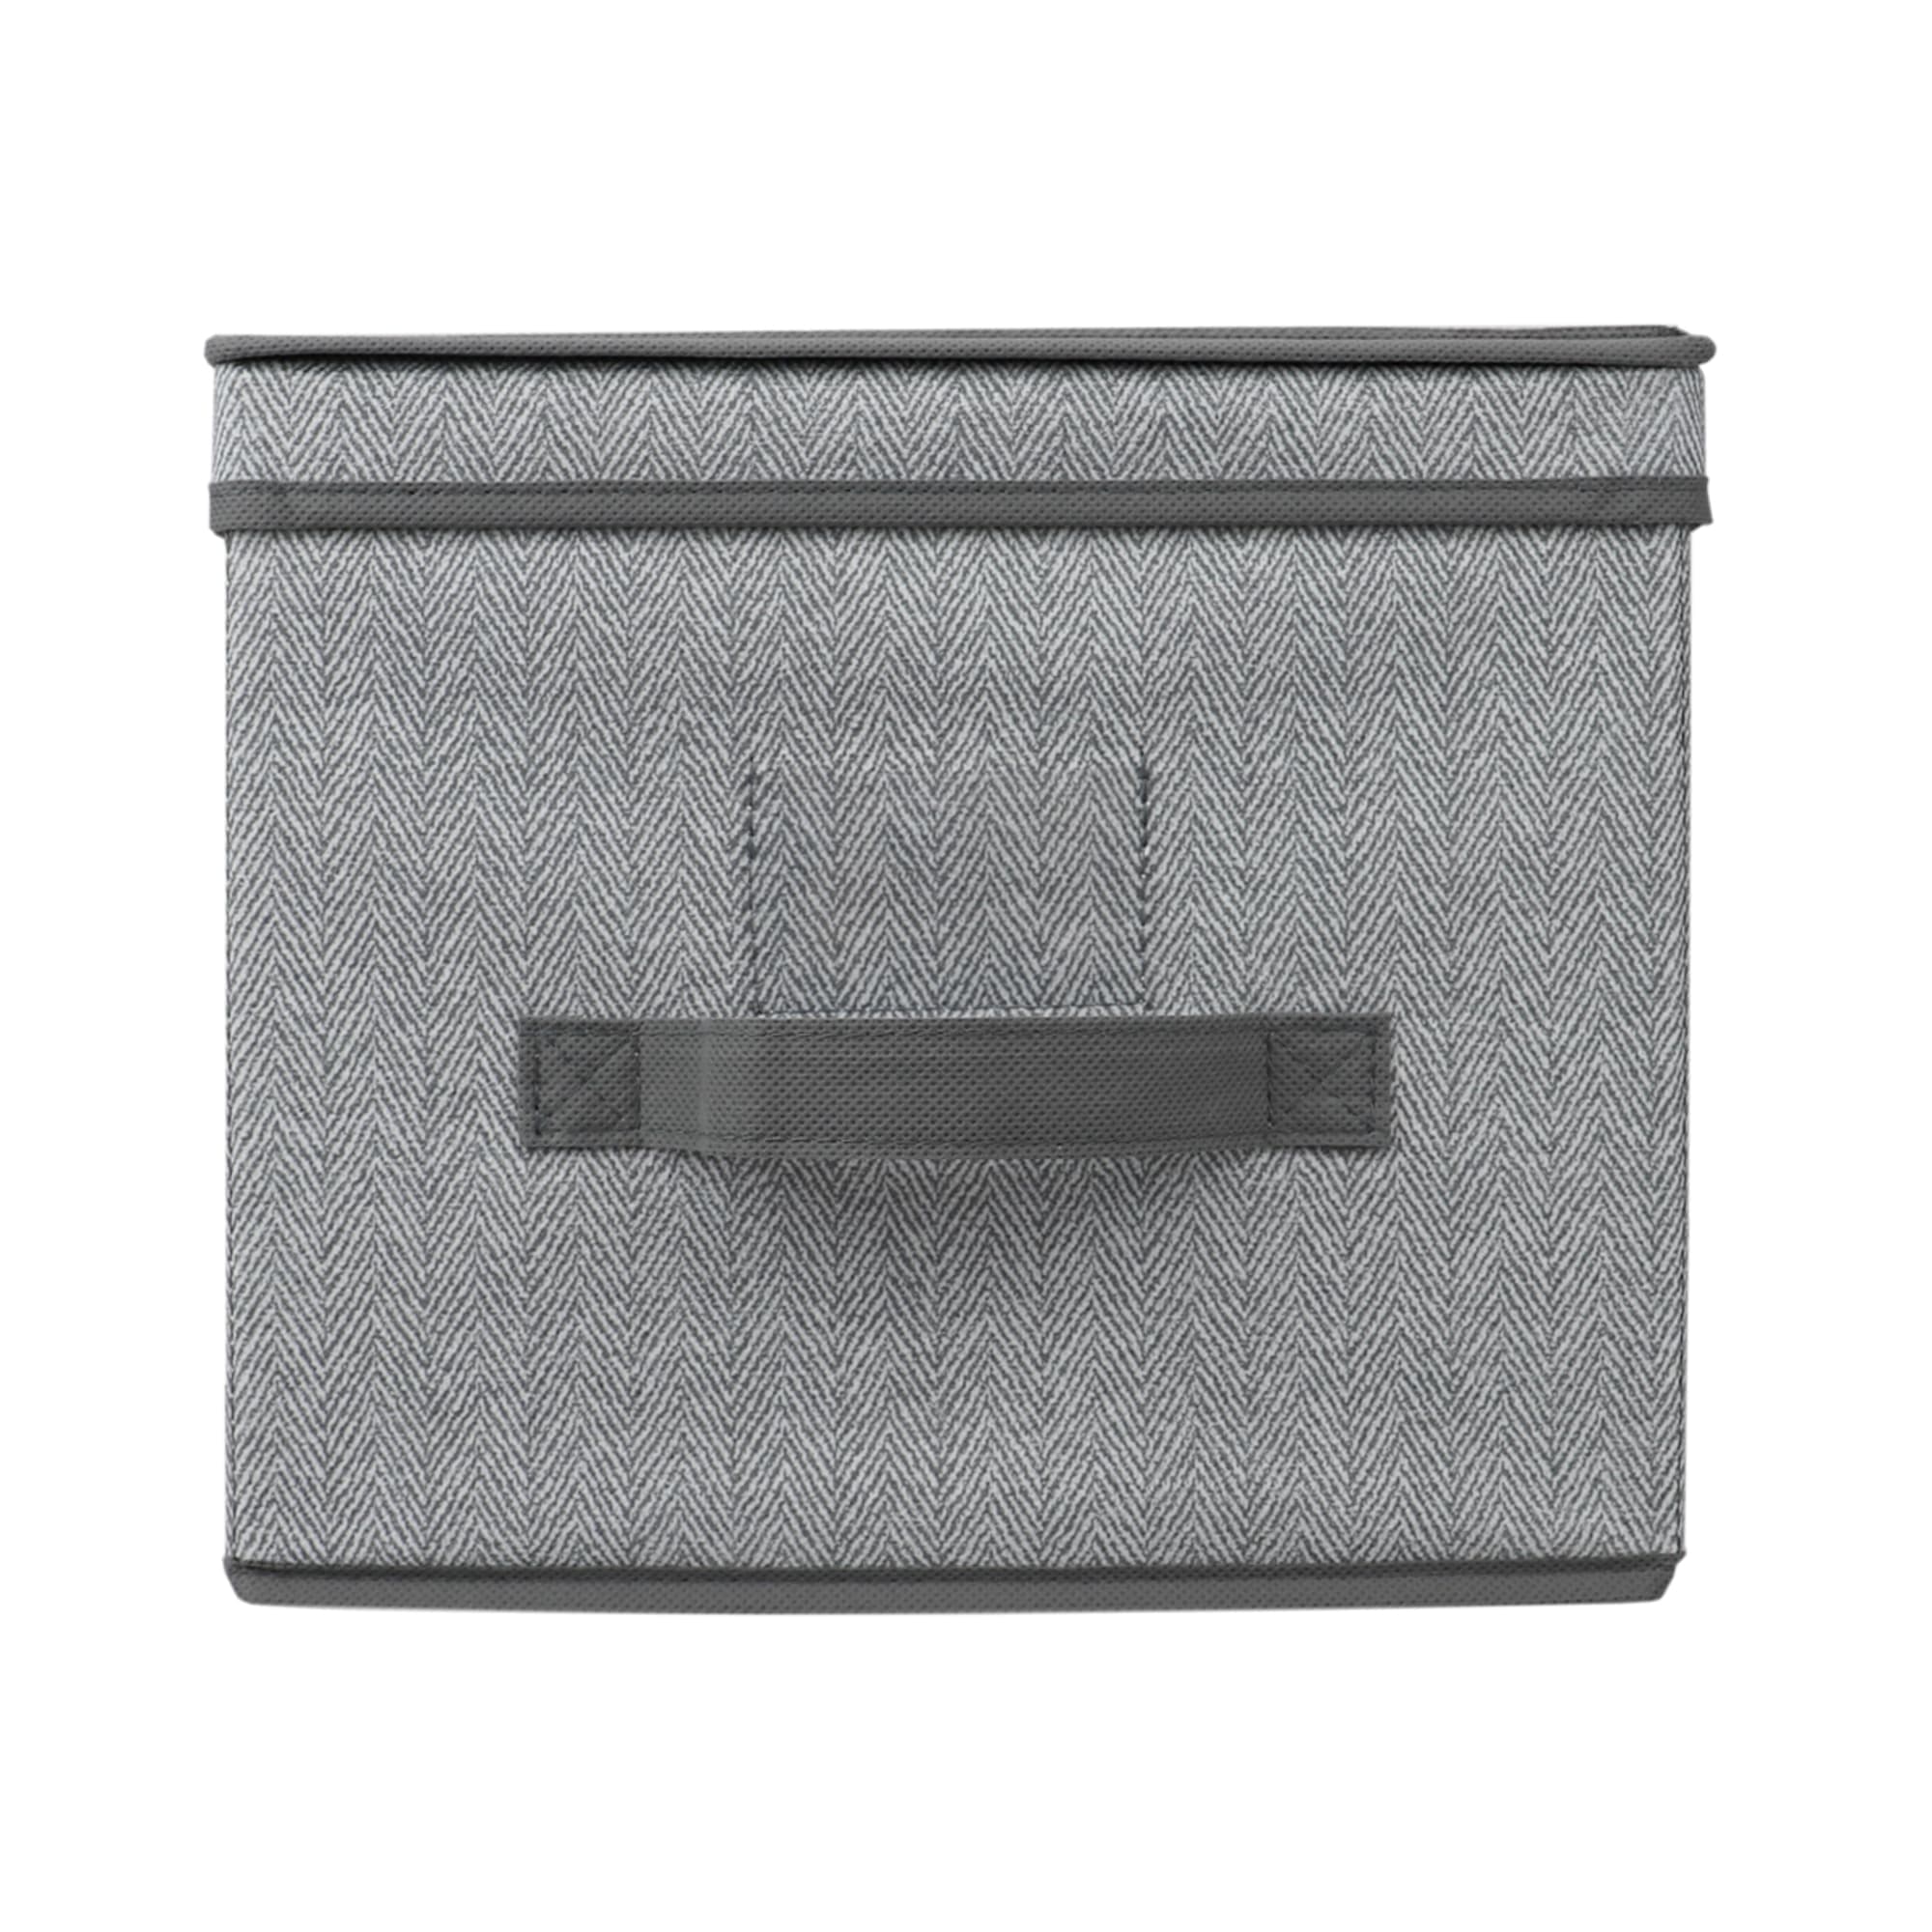 Home Basics Herringbone Large Non-woven Storage Box with Label Window, Grey $6.00 EACH, CASE PACK OF 12